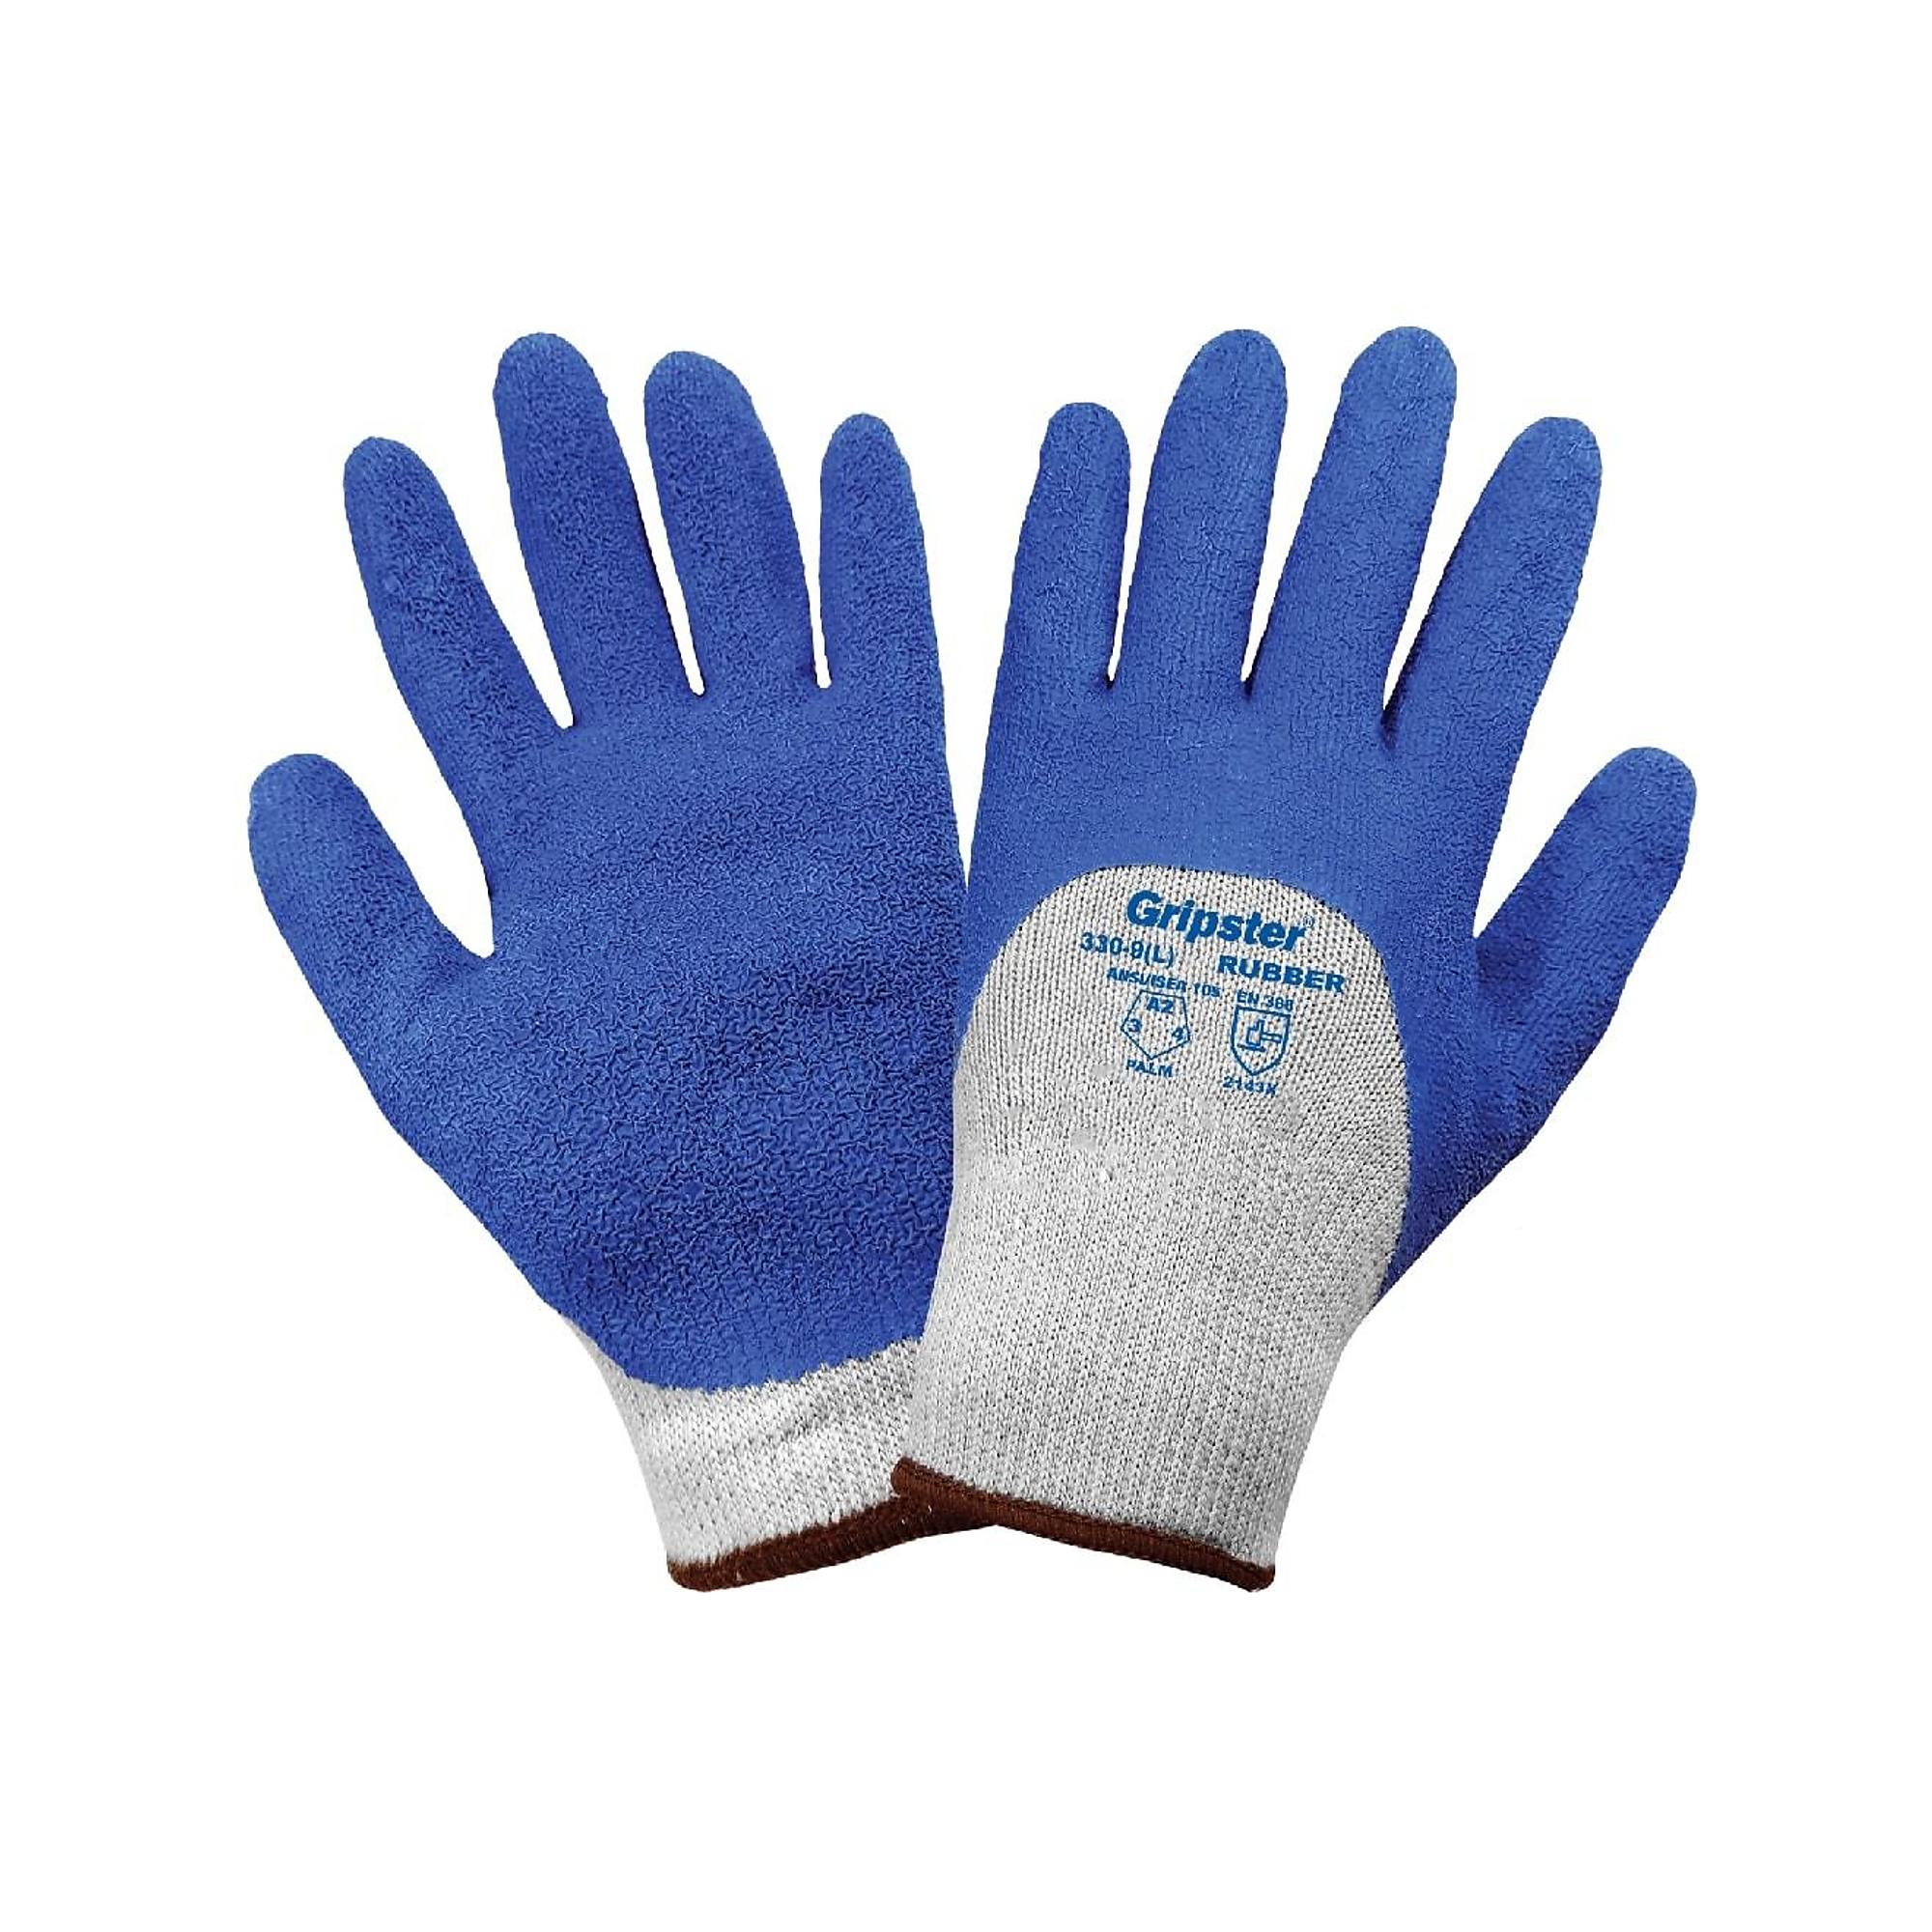 Global Glove Gripster , Gray, Blue 3/4 Rub Dip, Cut Resistant A2 Gloves - 12 Pairs, Size M, Color Gray/Blue, Included (qty.) 12 Model 330-8(M)